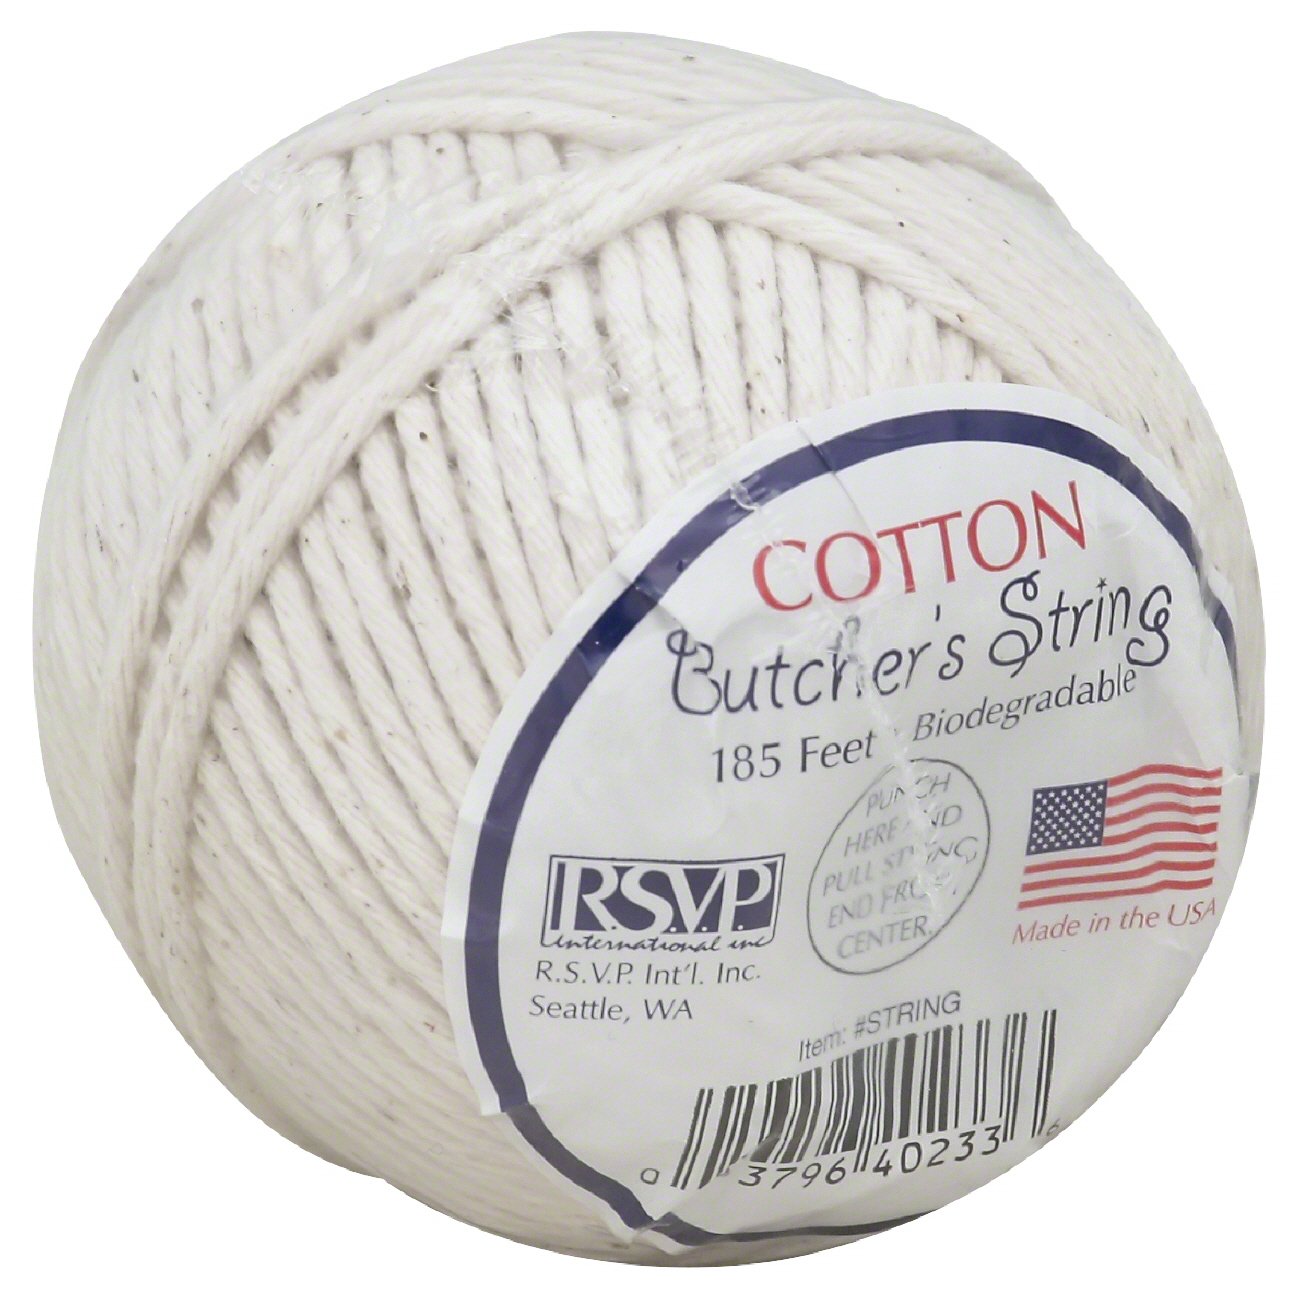 RSVP Cotton Food Safe Butcher's String, 185-feet, Made in USA